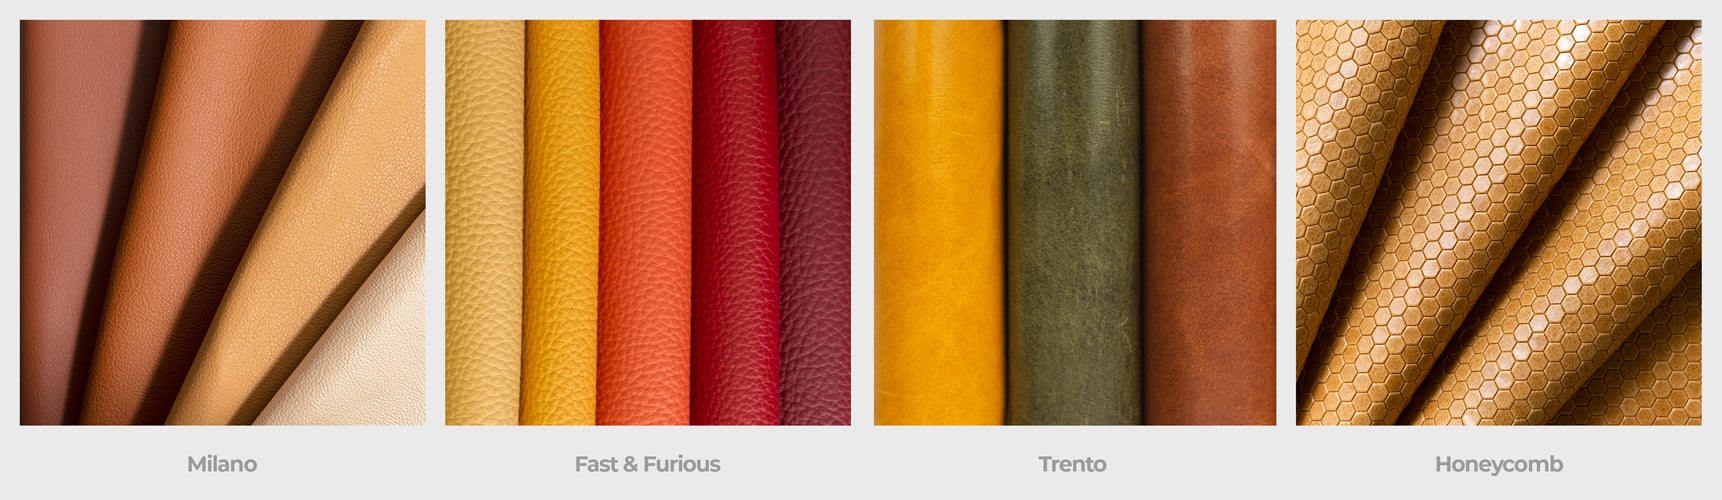 Jamie Stern Leathers including Milano, Fast & Furious, Trento and Honeycomb